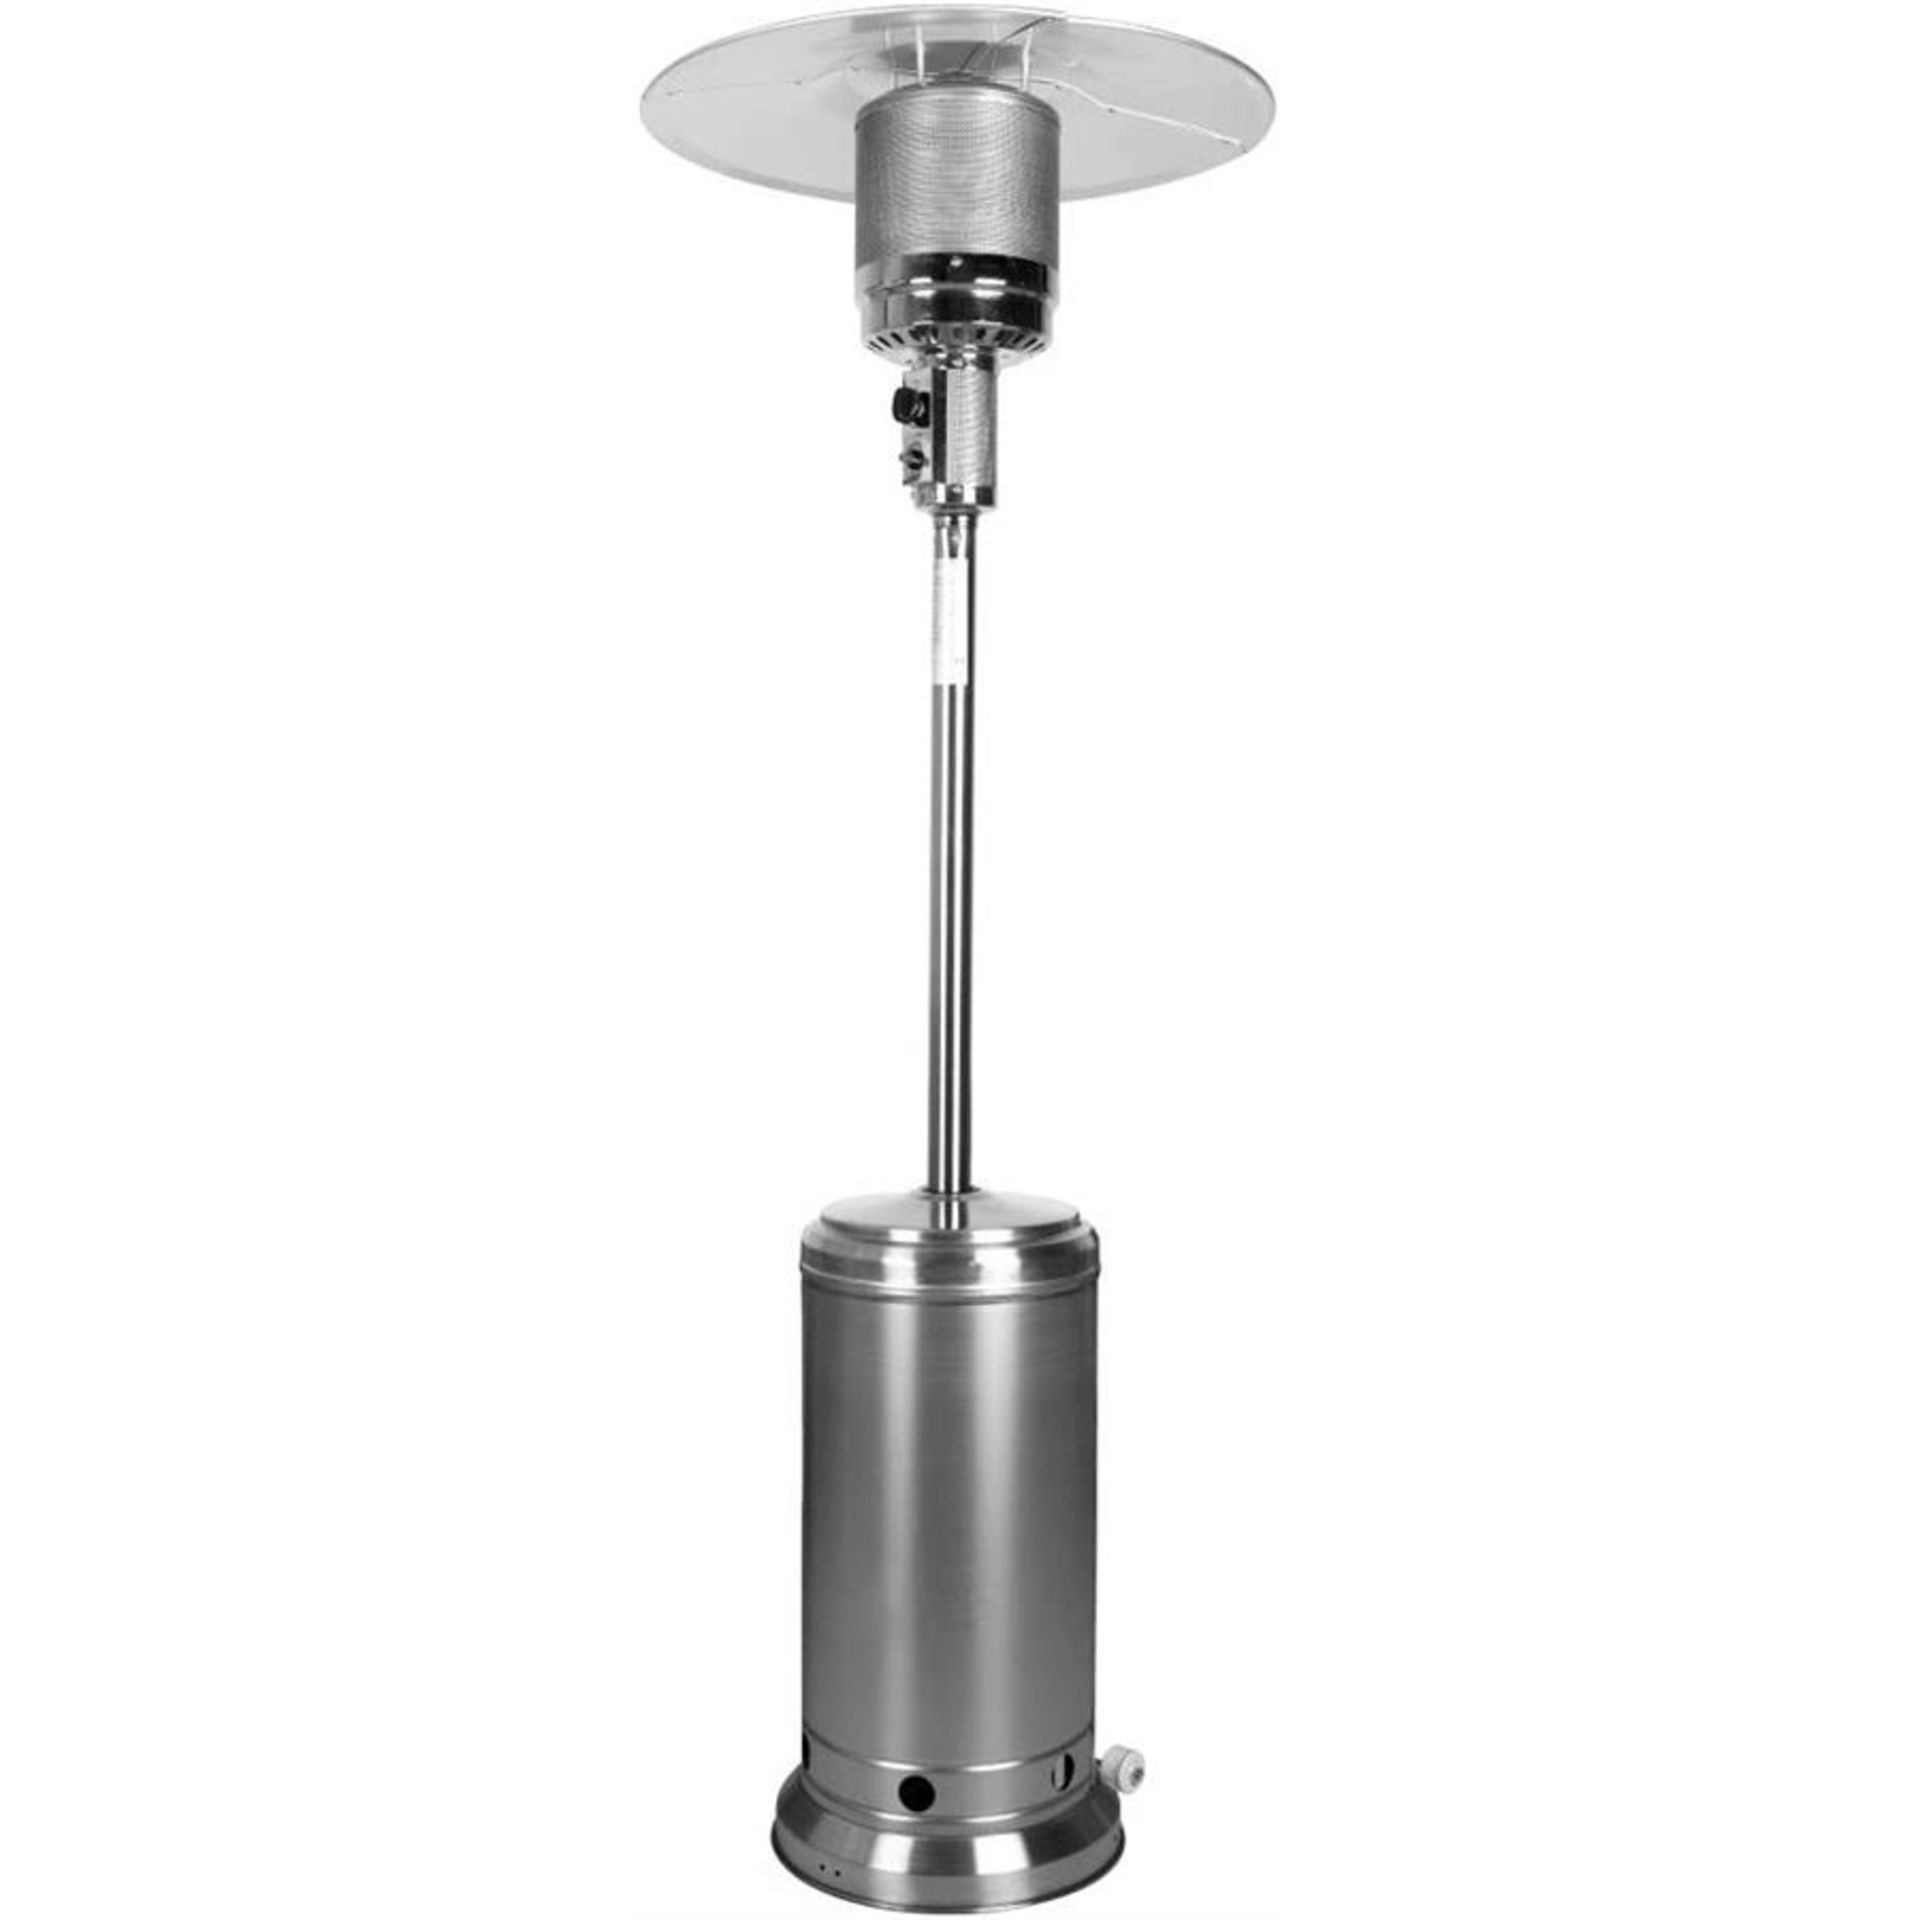 + VAT Brand New Chelsea Garden Company Garden Patio Heater With Cover - Item Is Available From - Image 2 of 2